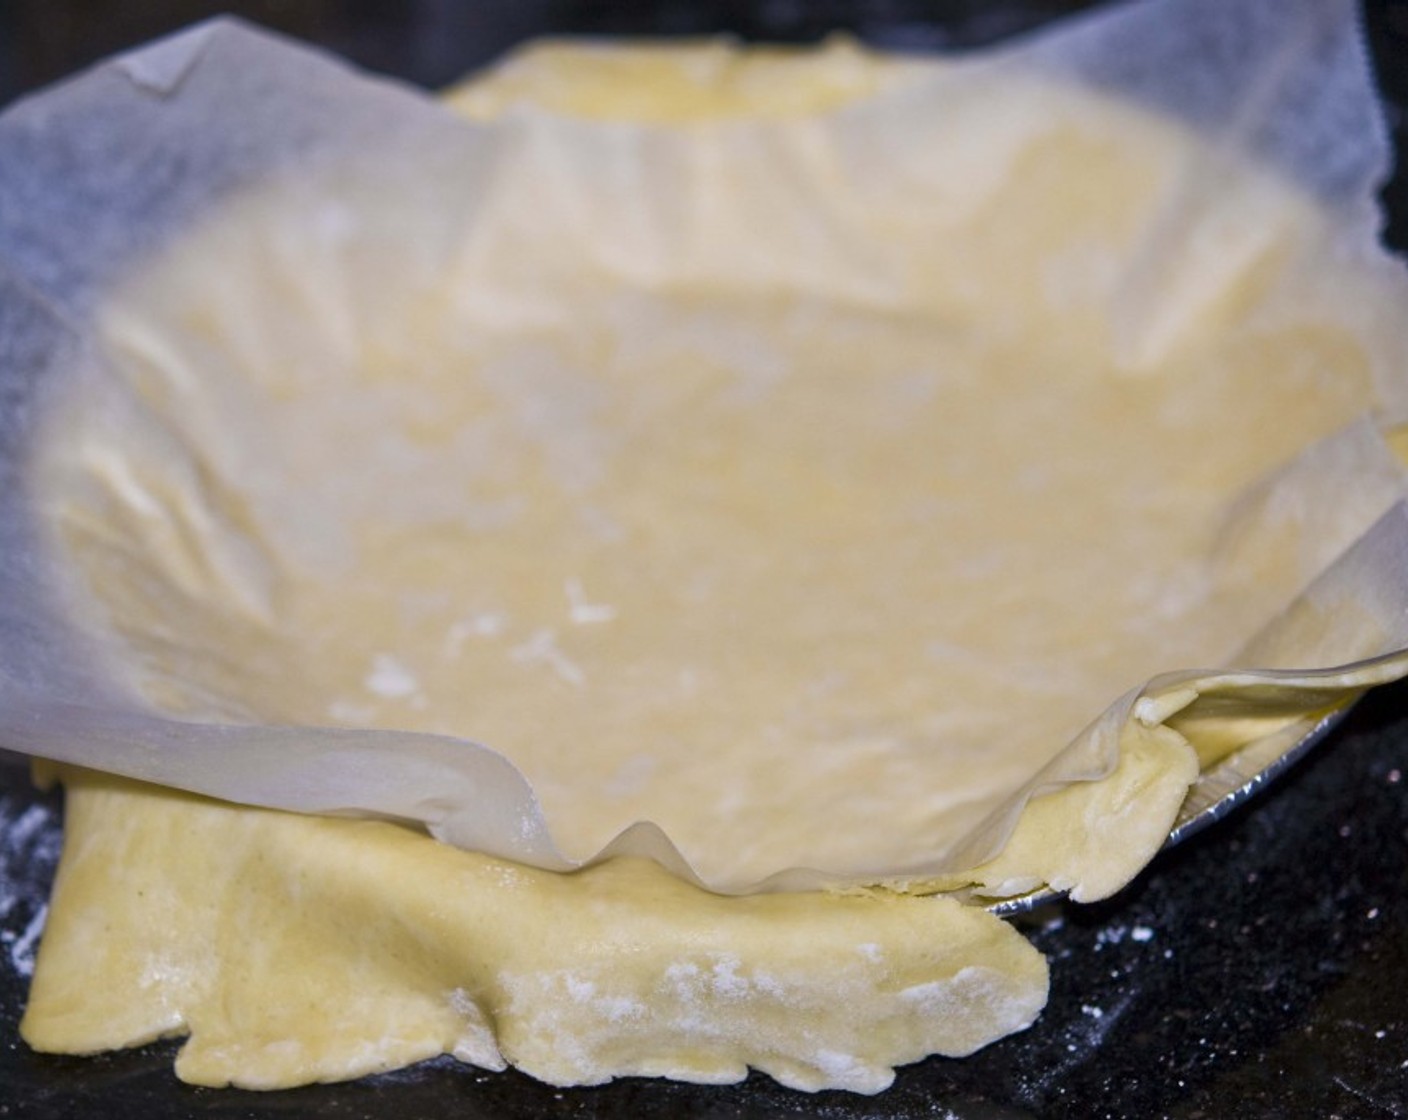 step 6 Next transfer the dough to a pie pan by turning it upside down and gently taking off the baking sheet.